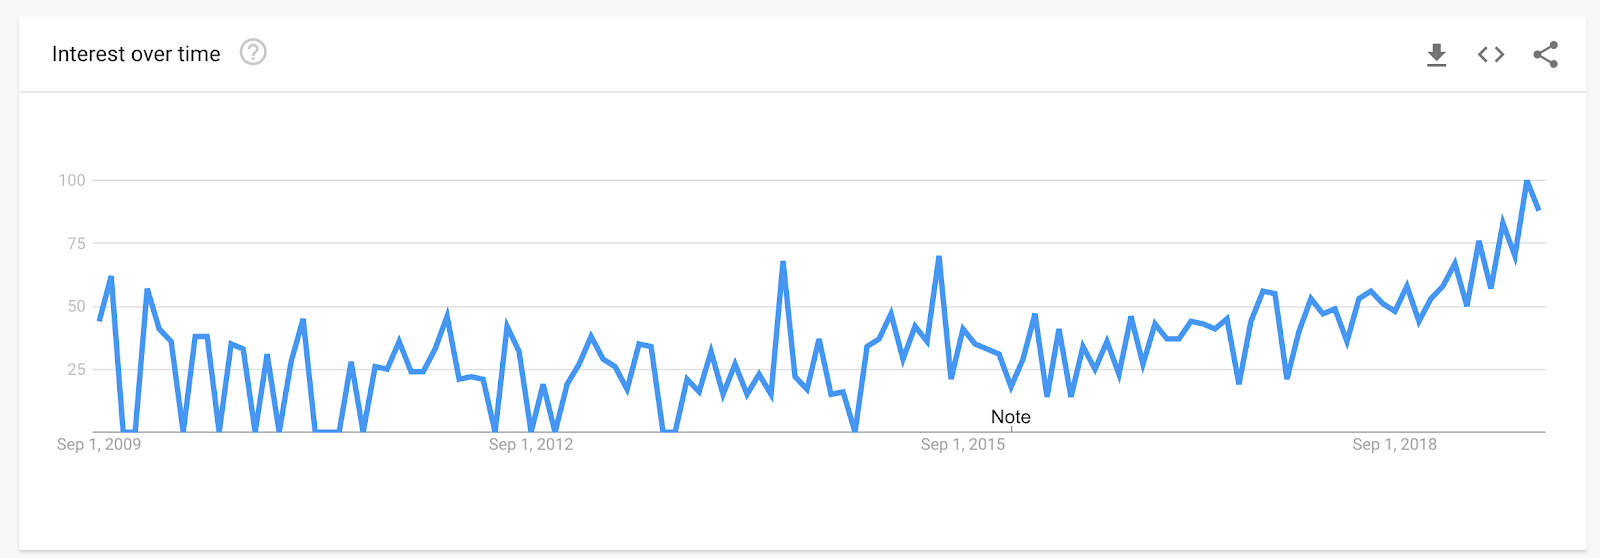 "web scraping legal" on Google trends